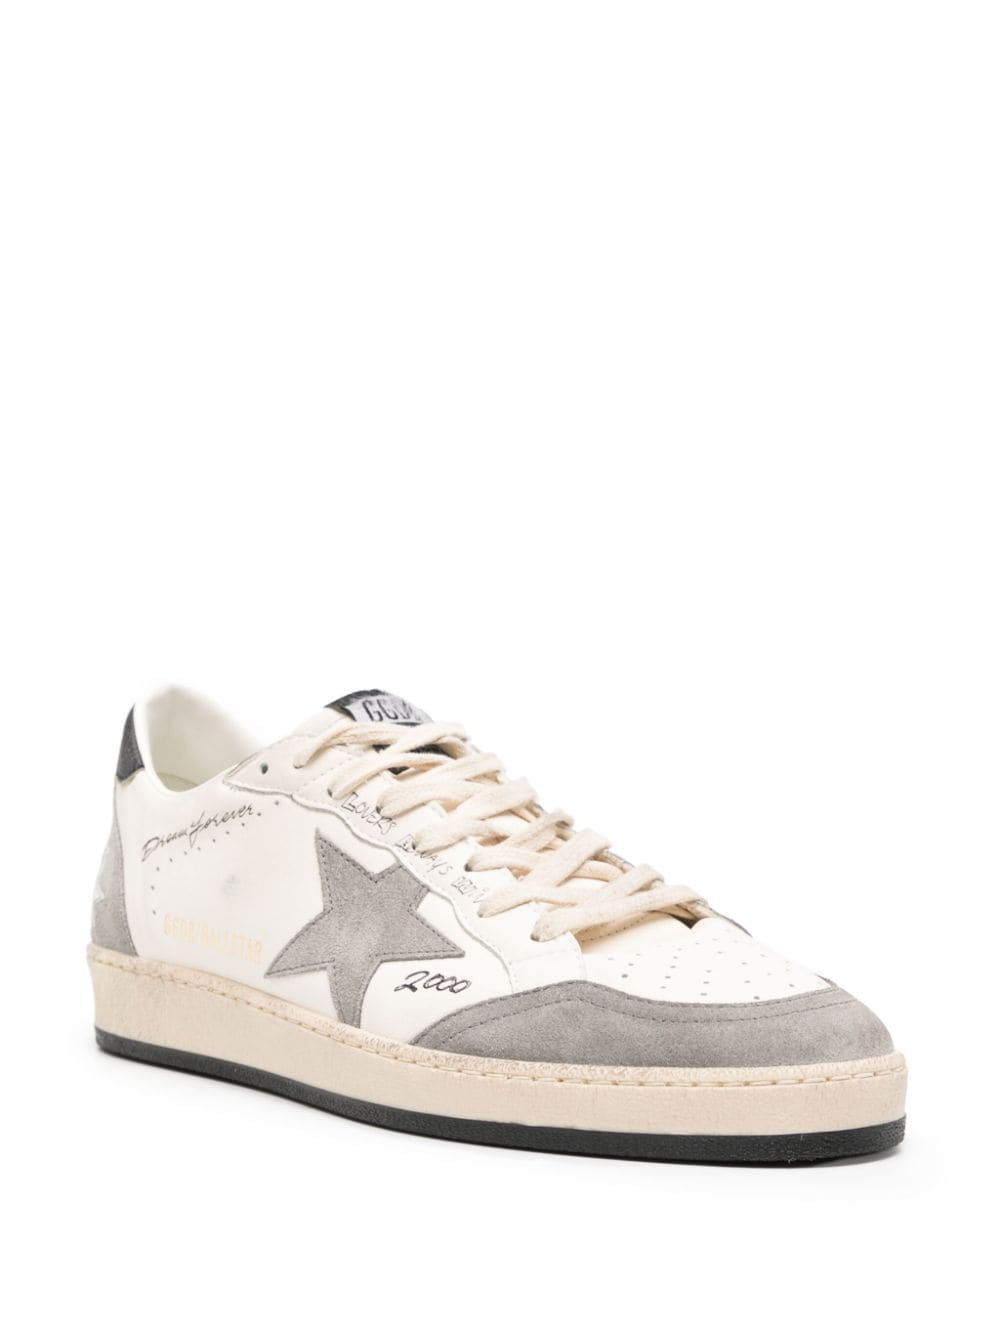 Image 2 of Golden Goose Ball Star leather sneakers